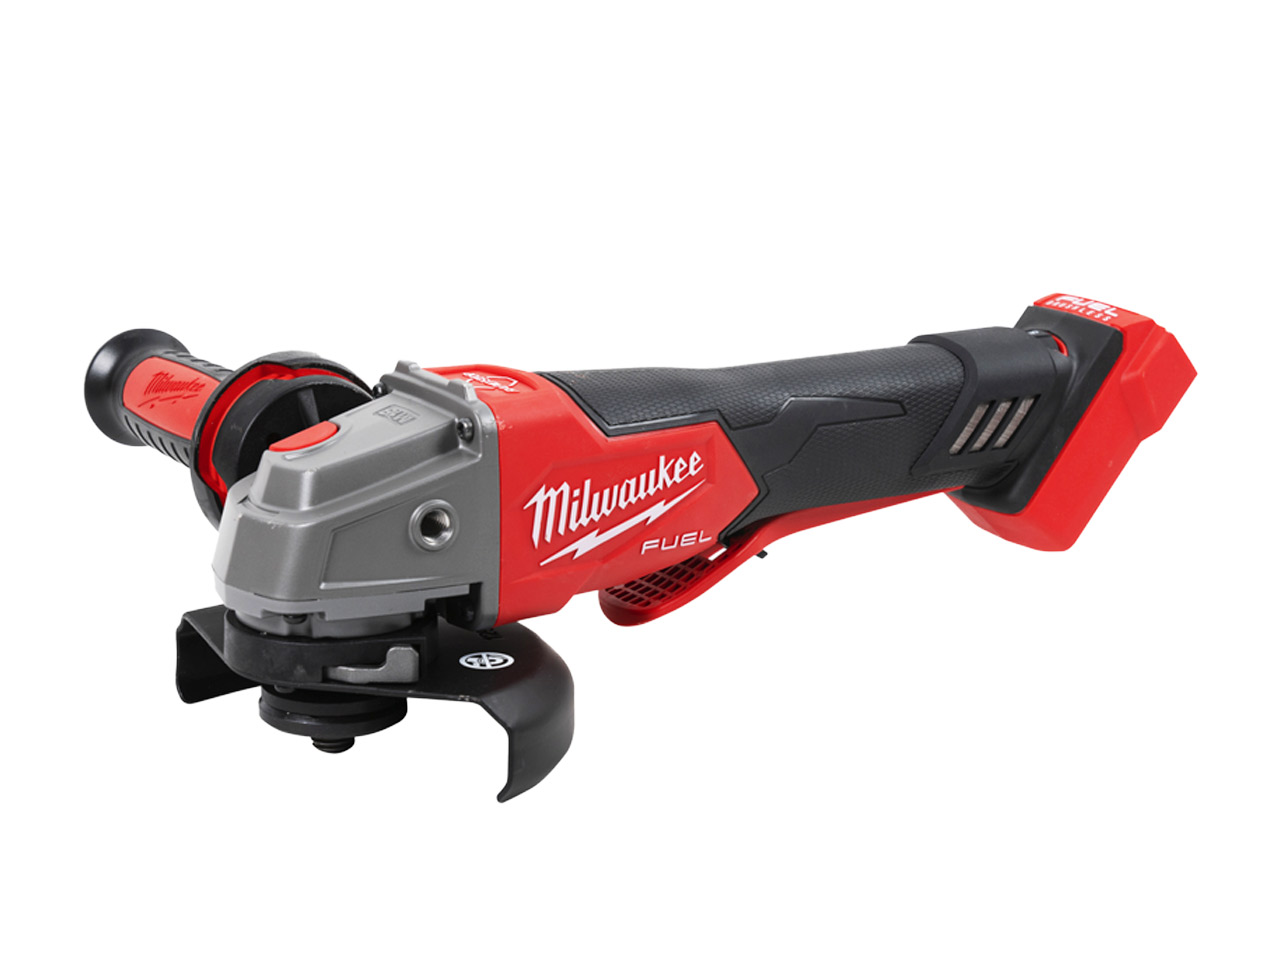 MILWAUKEE M18 GRINDER C/W 2 X 5AH BATTERIES & CHARGER IN CASE